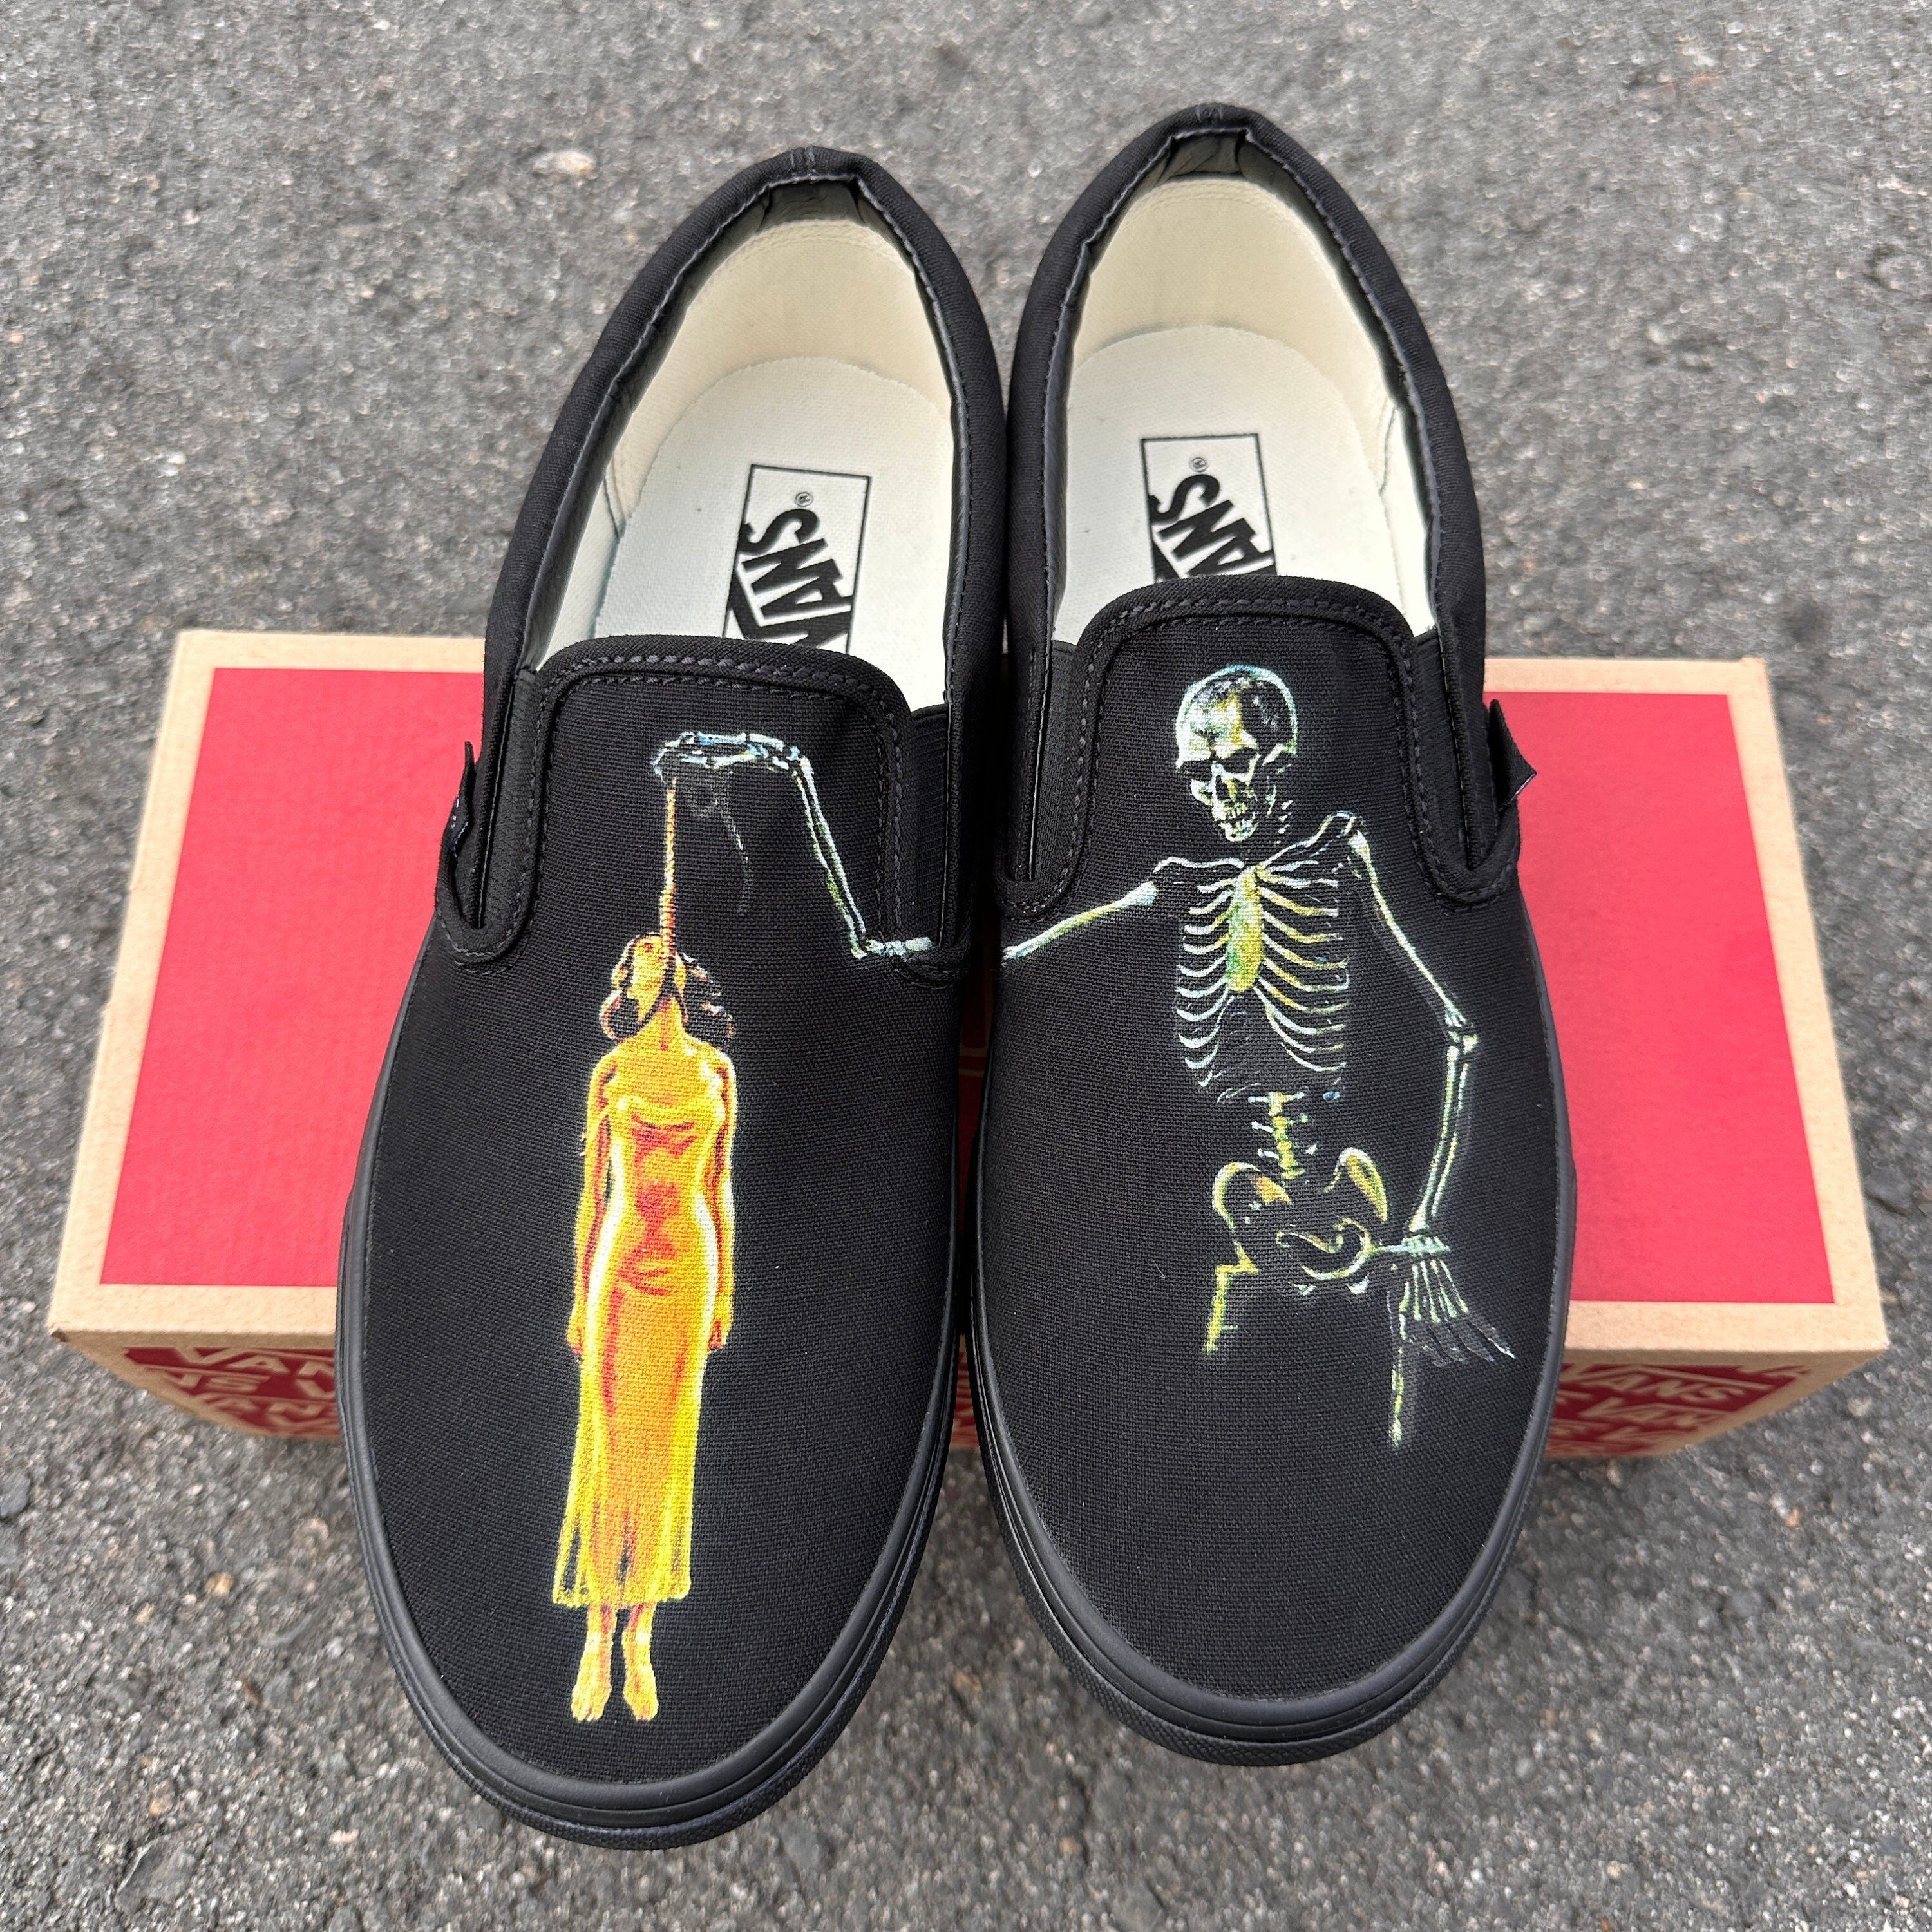 Vans x Horror Collection Jason Friday The 13th Slip On Shoes Men's Size 9  New